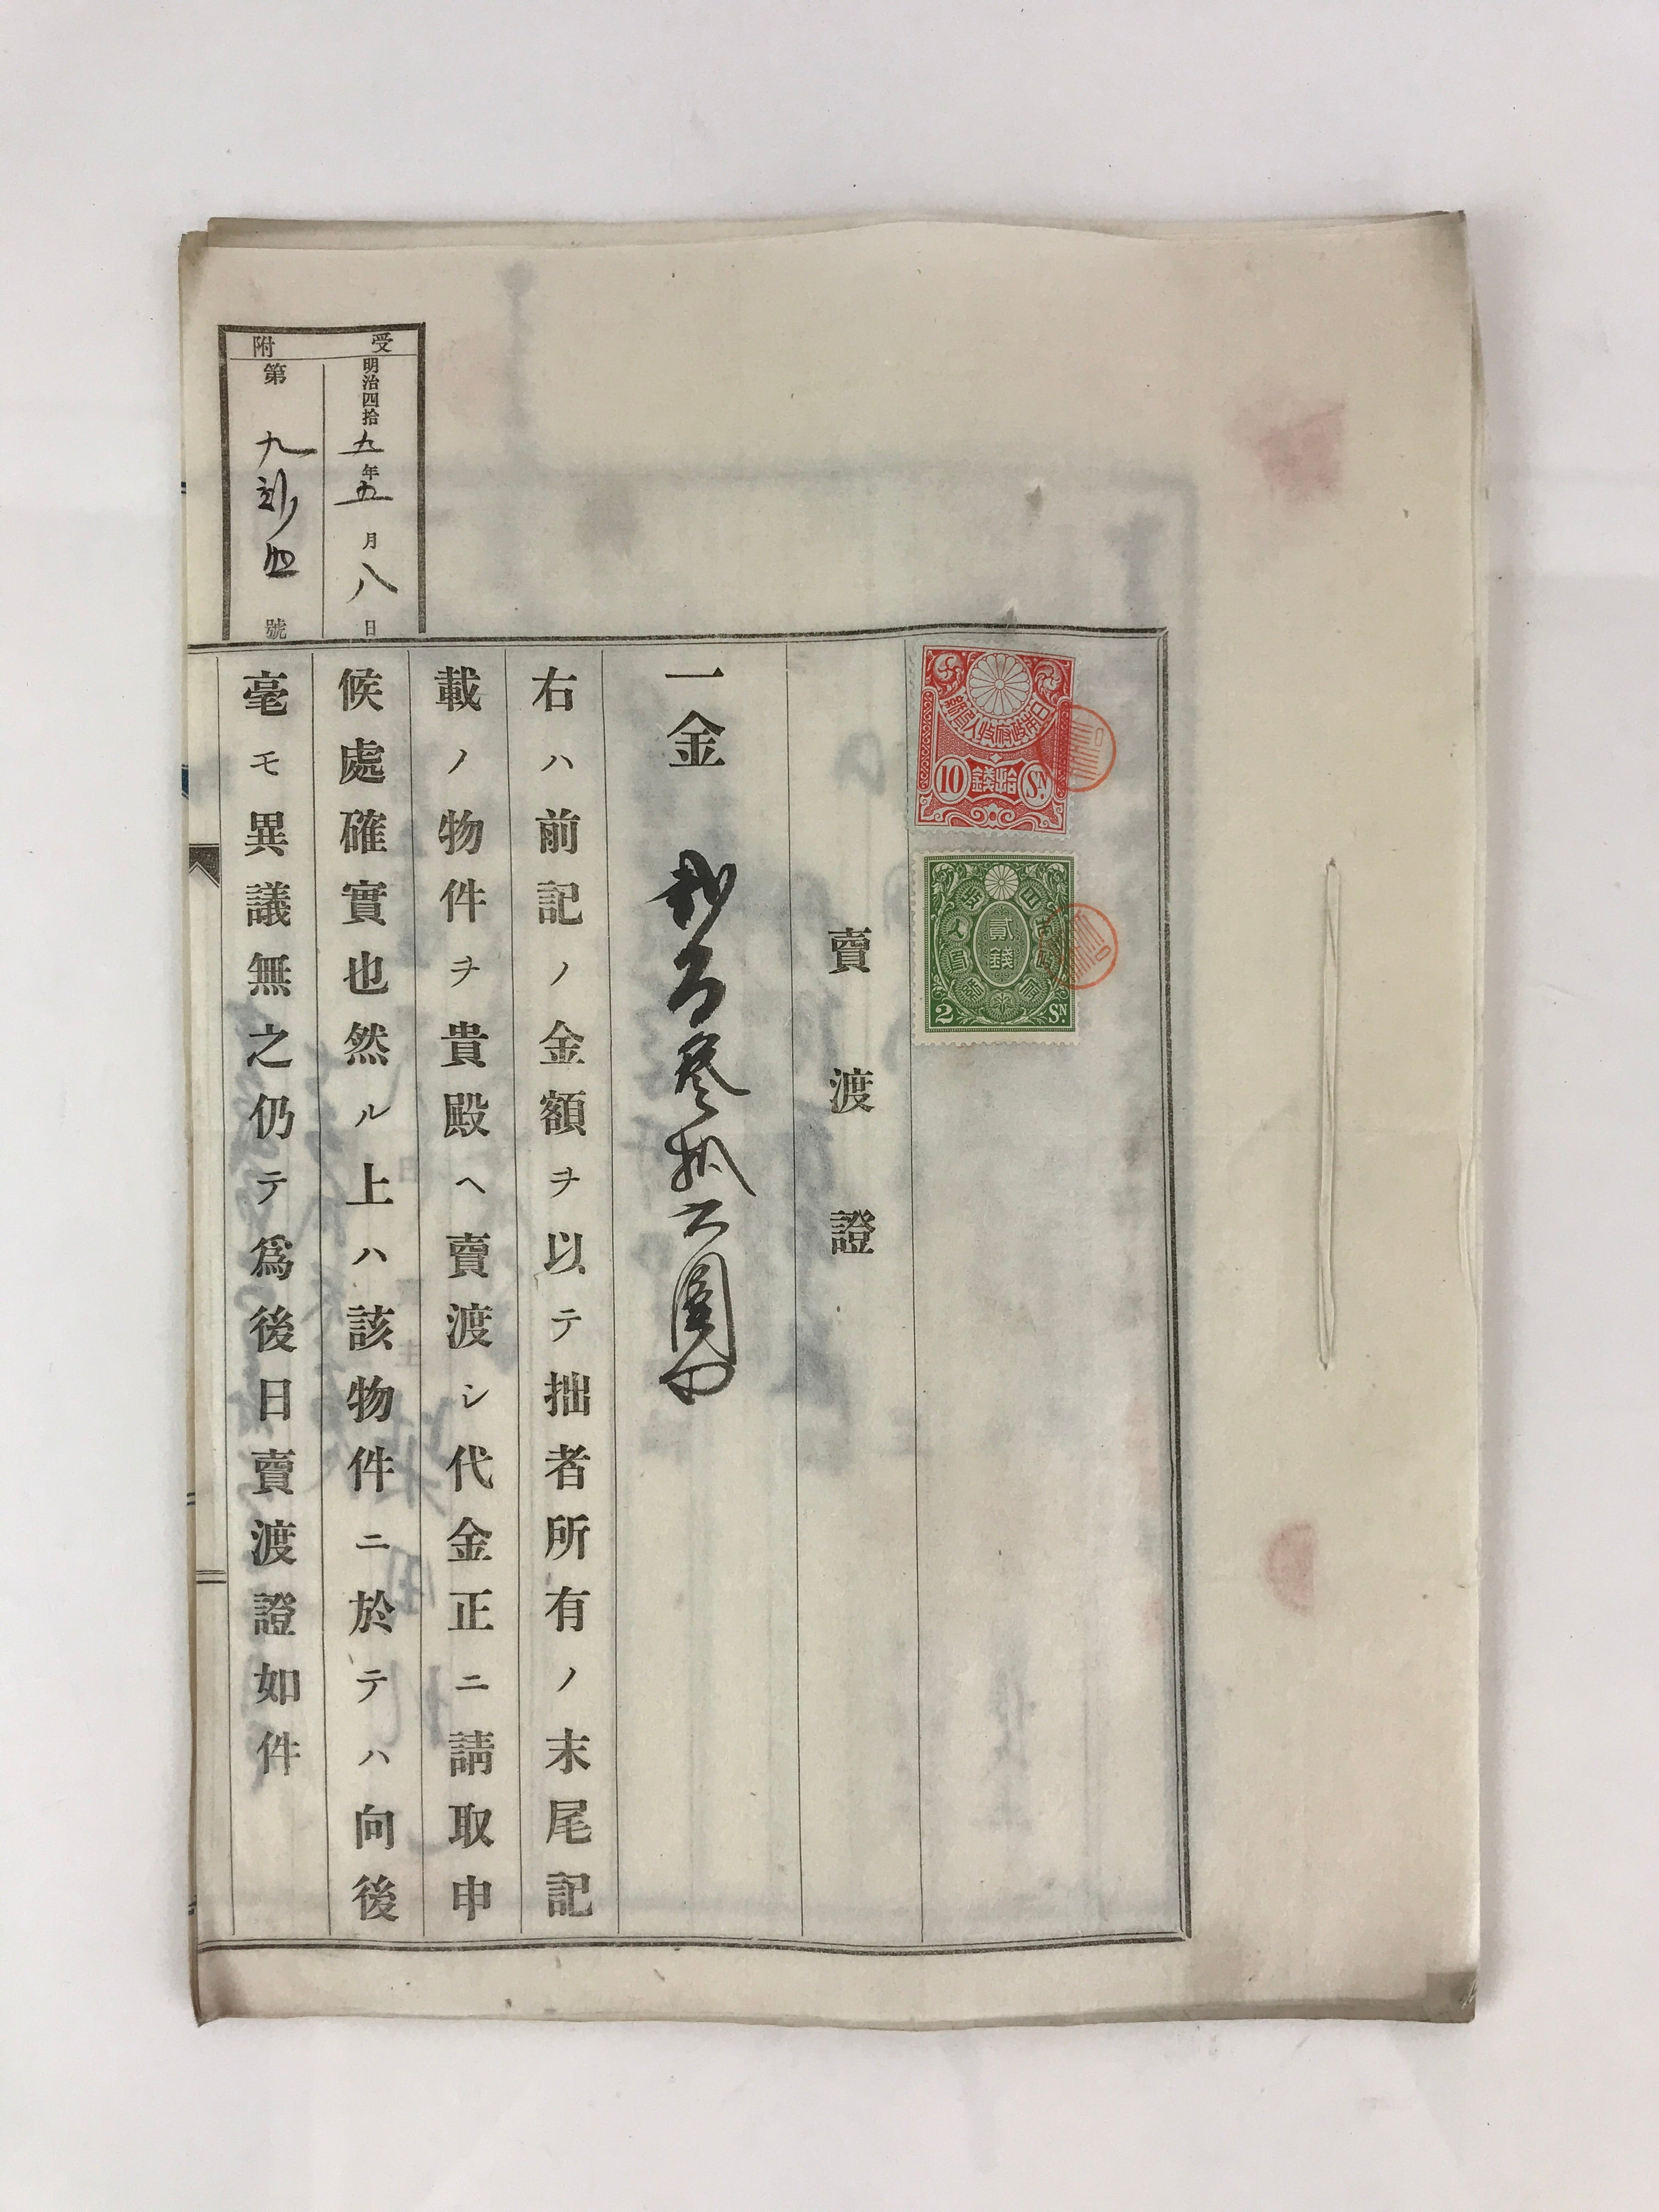 Antique C1912 Japanese House Purchase Certificate Meiji Period Paper P304